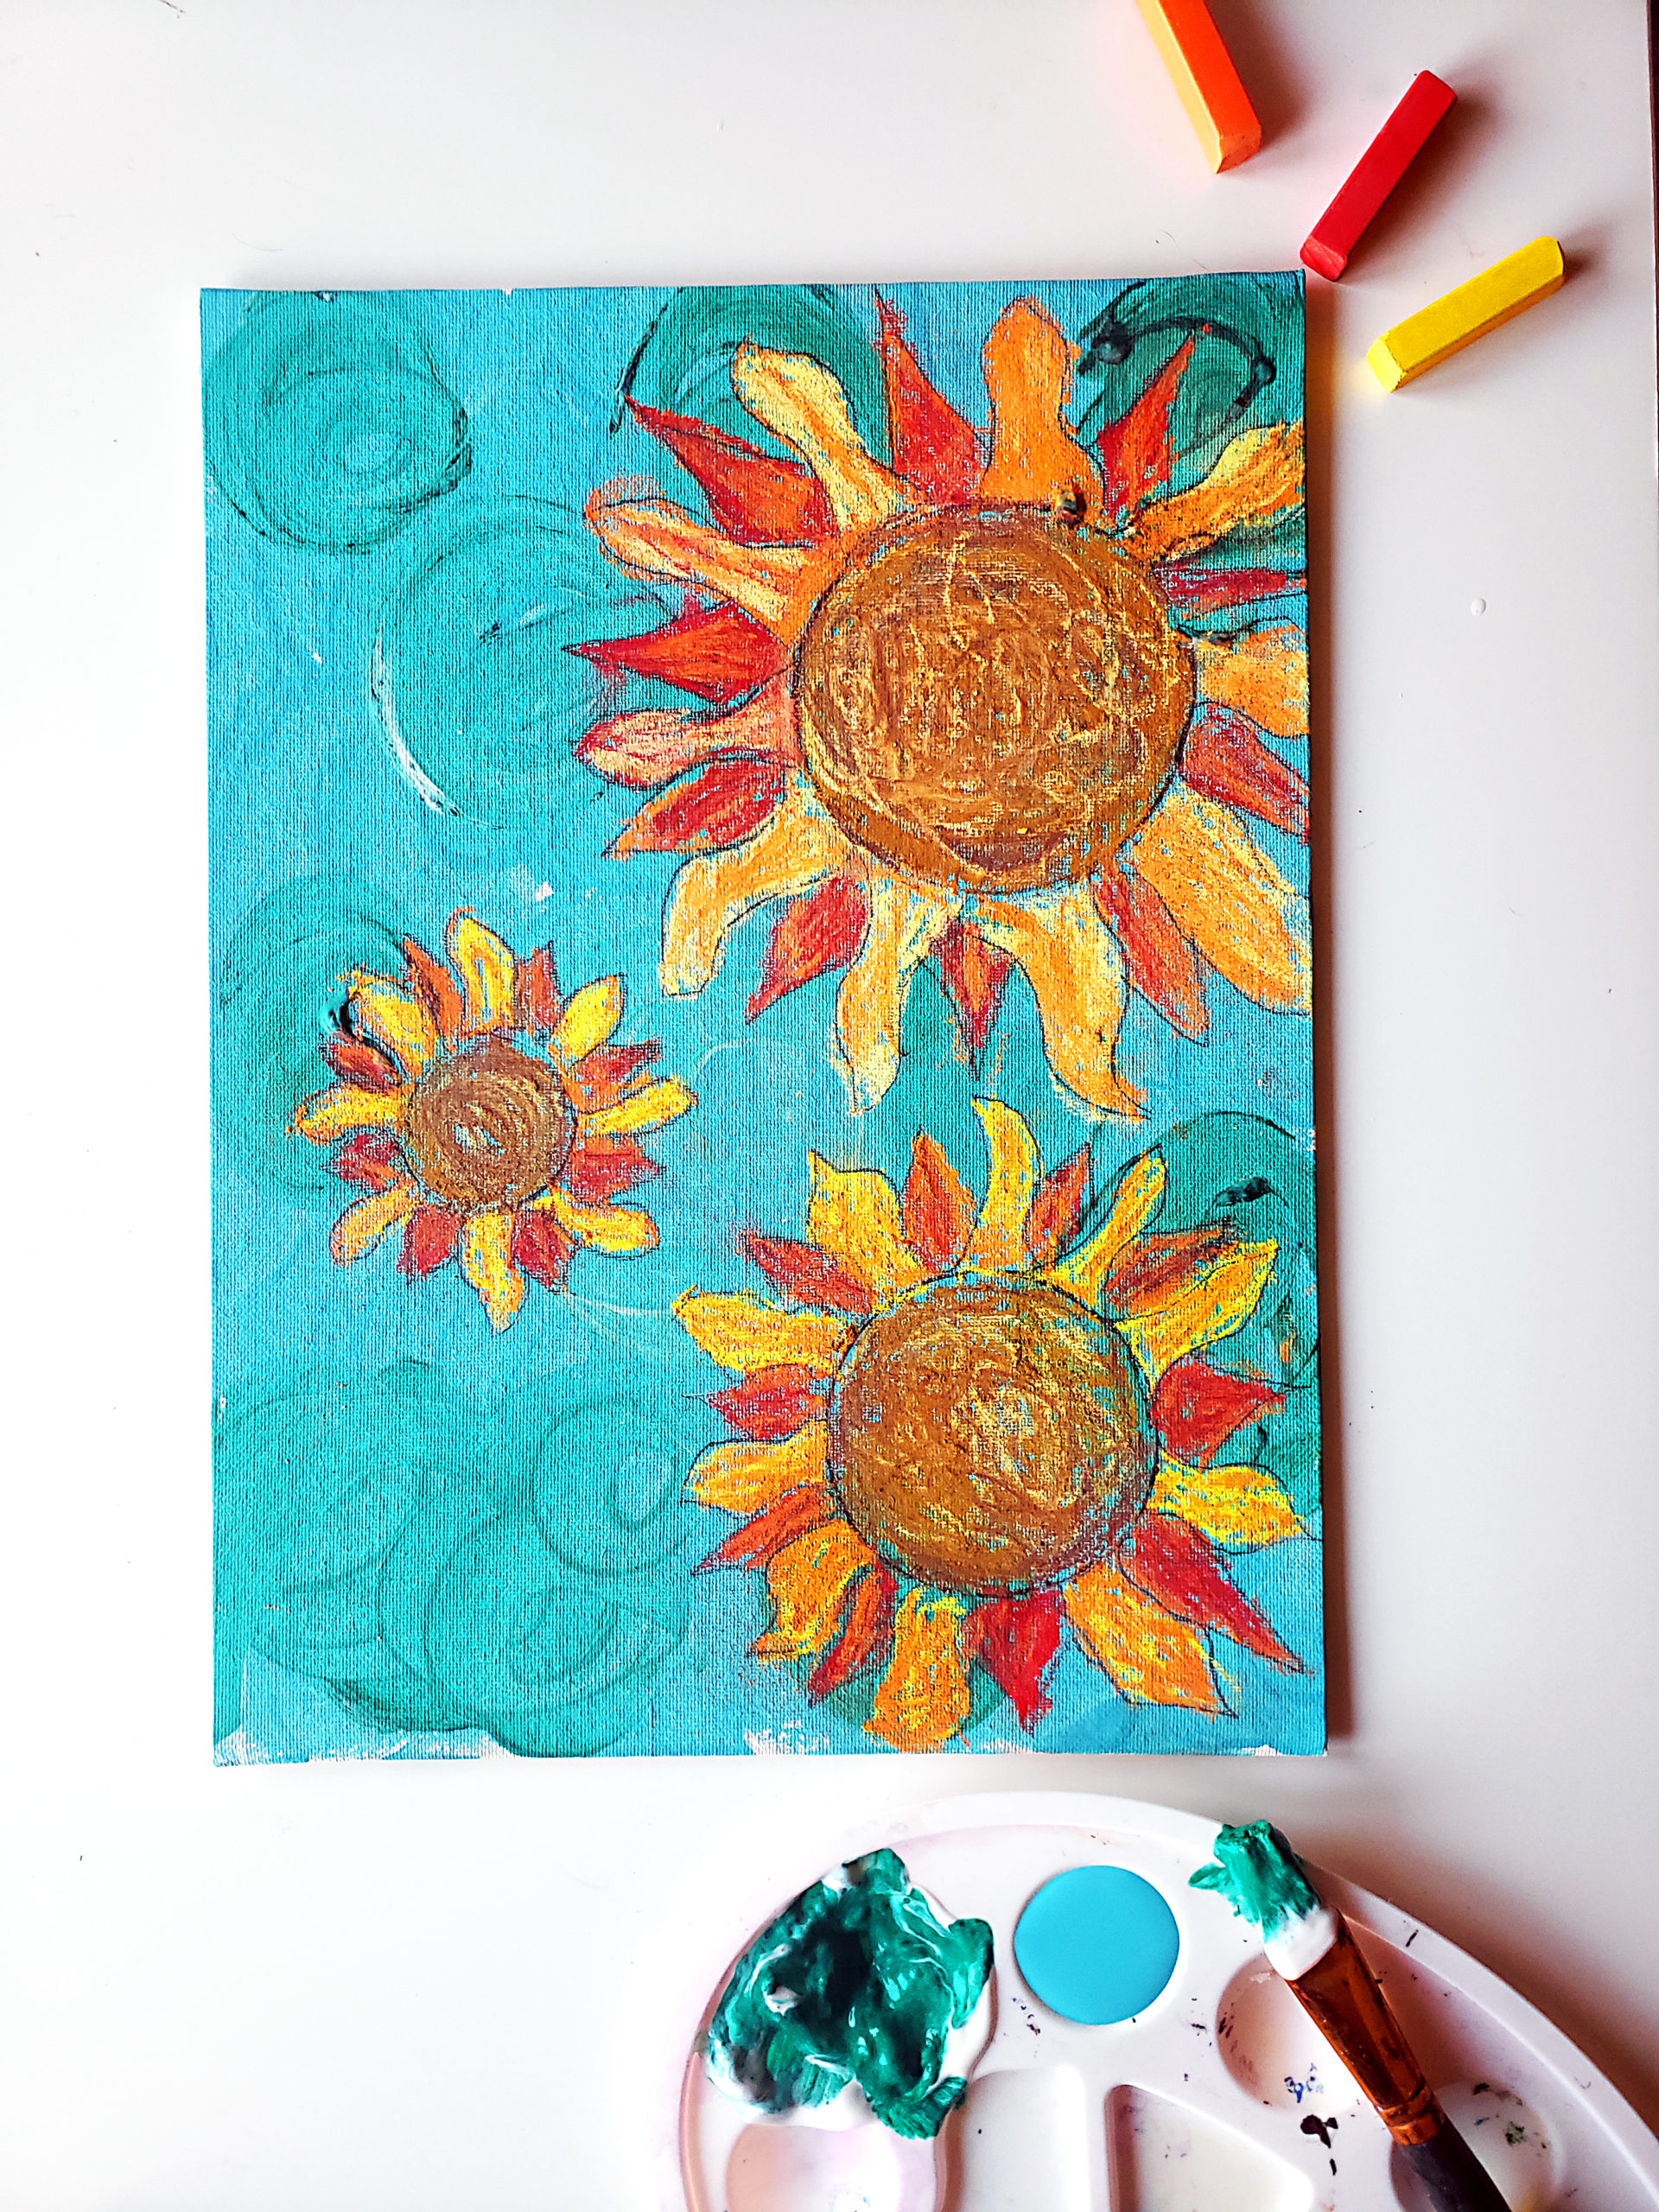 Whimsical Van Gogh art project to support an art history lesson on post-impressionism. 